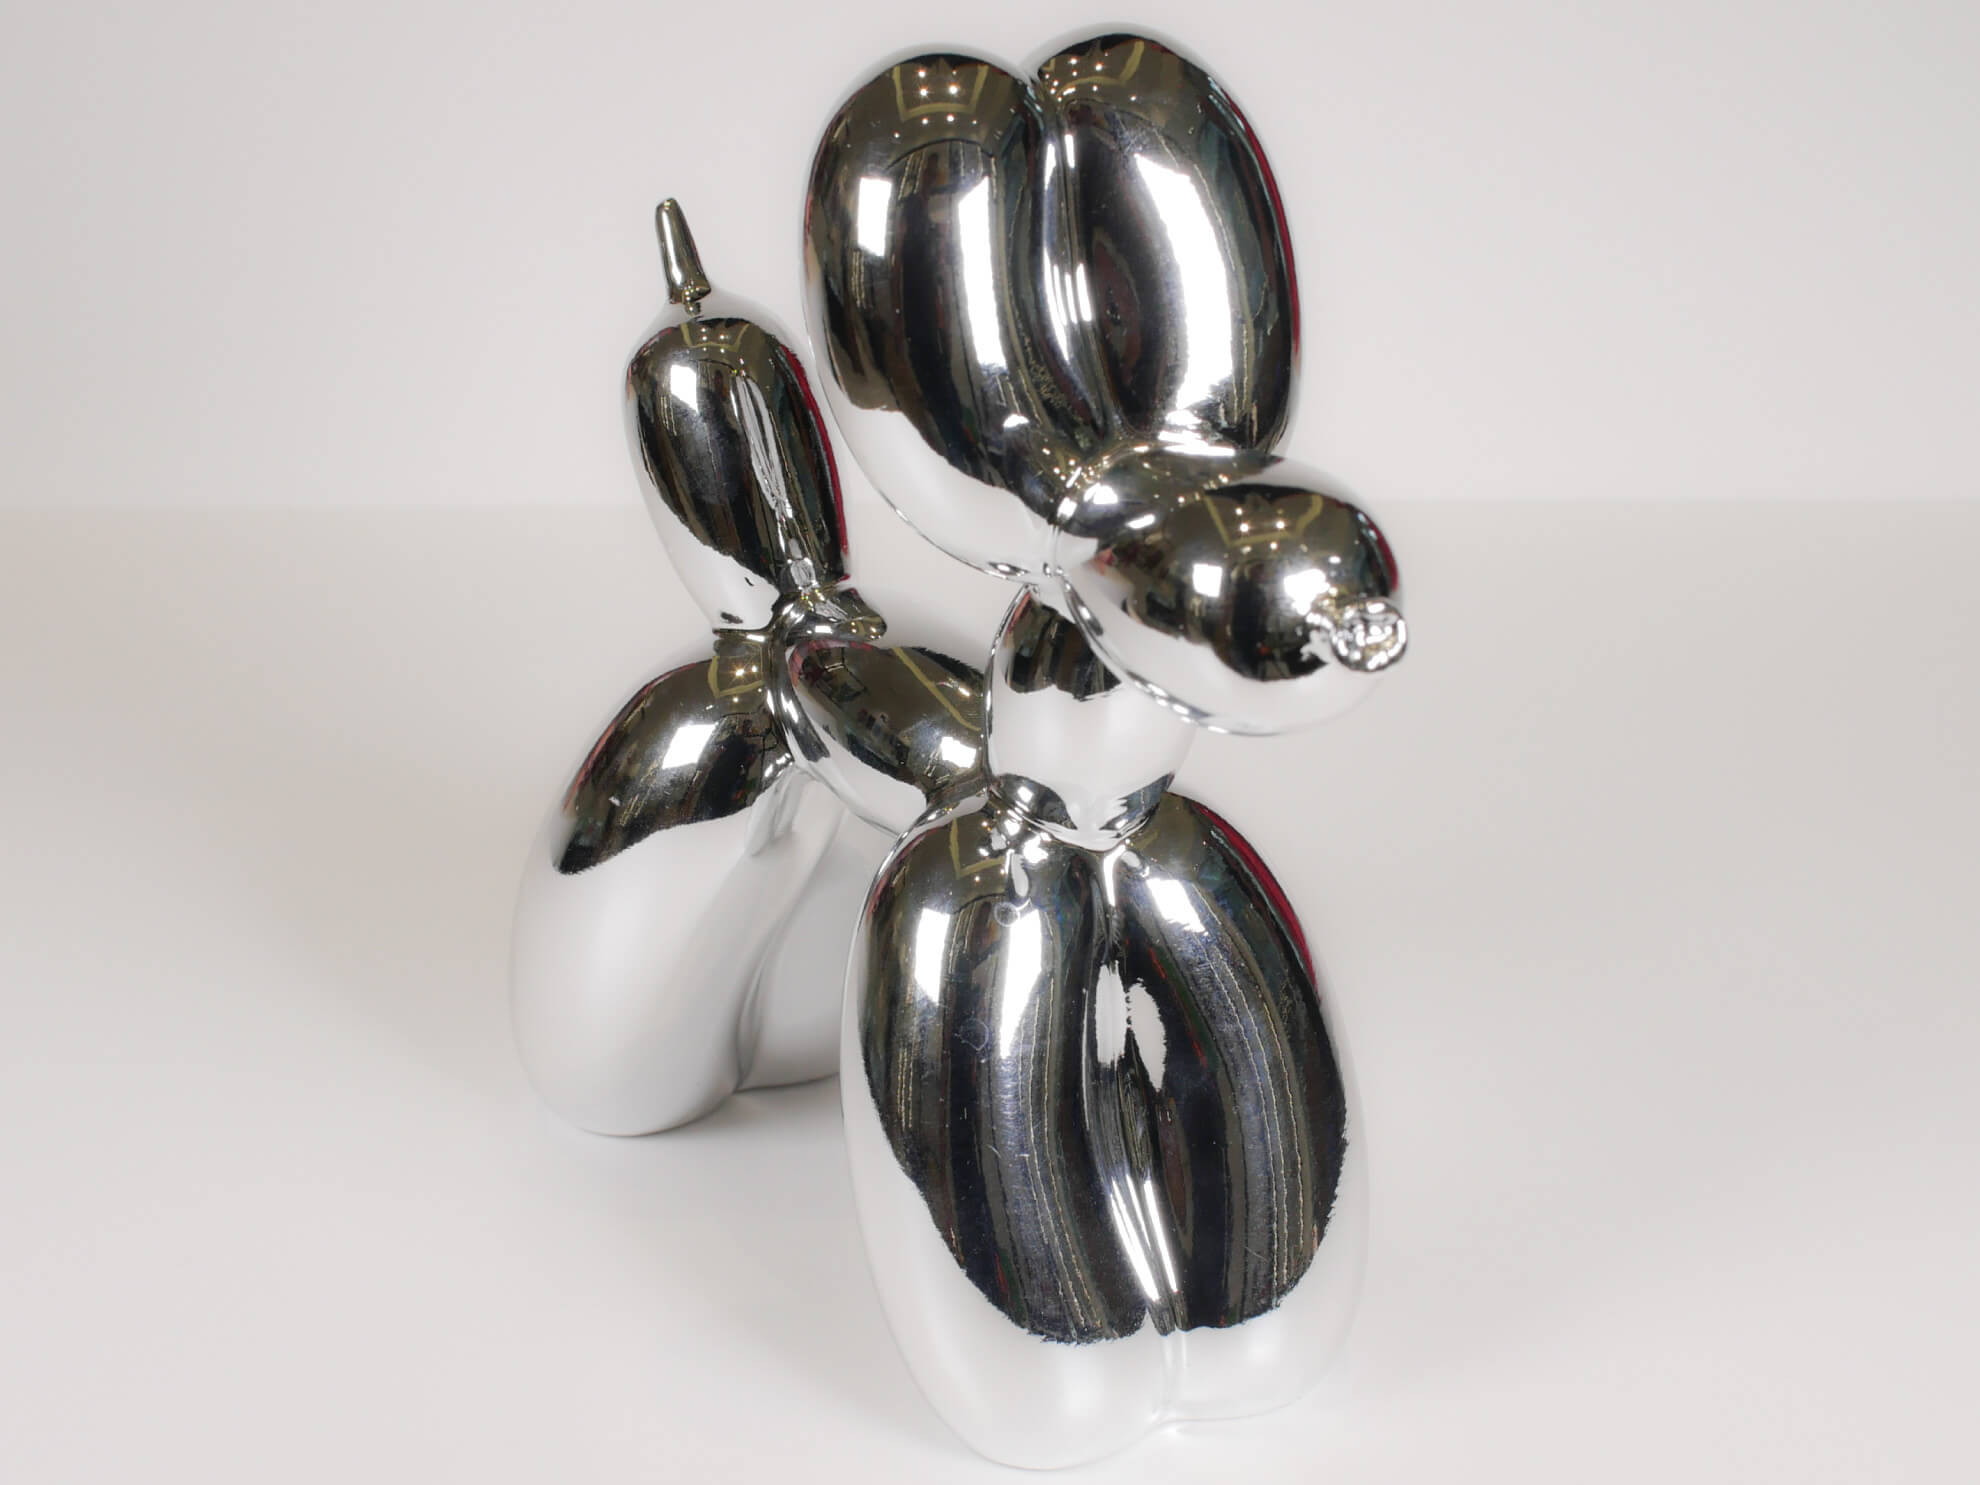 18 Stylish Jeff Koons Puppy Vase Price 2024 free download jeff koons puppy vase price of small silver balloon dog figurine musart boutique in small silver balloon dog face view inspired by jeff koons artwork